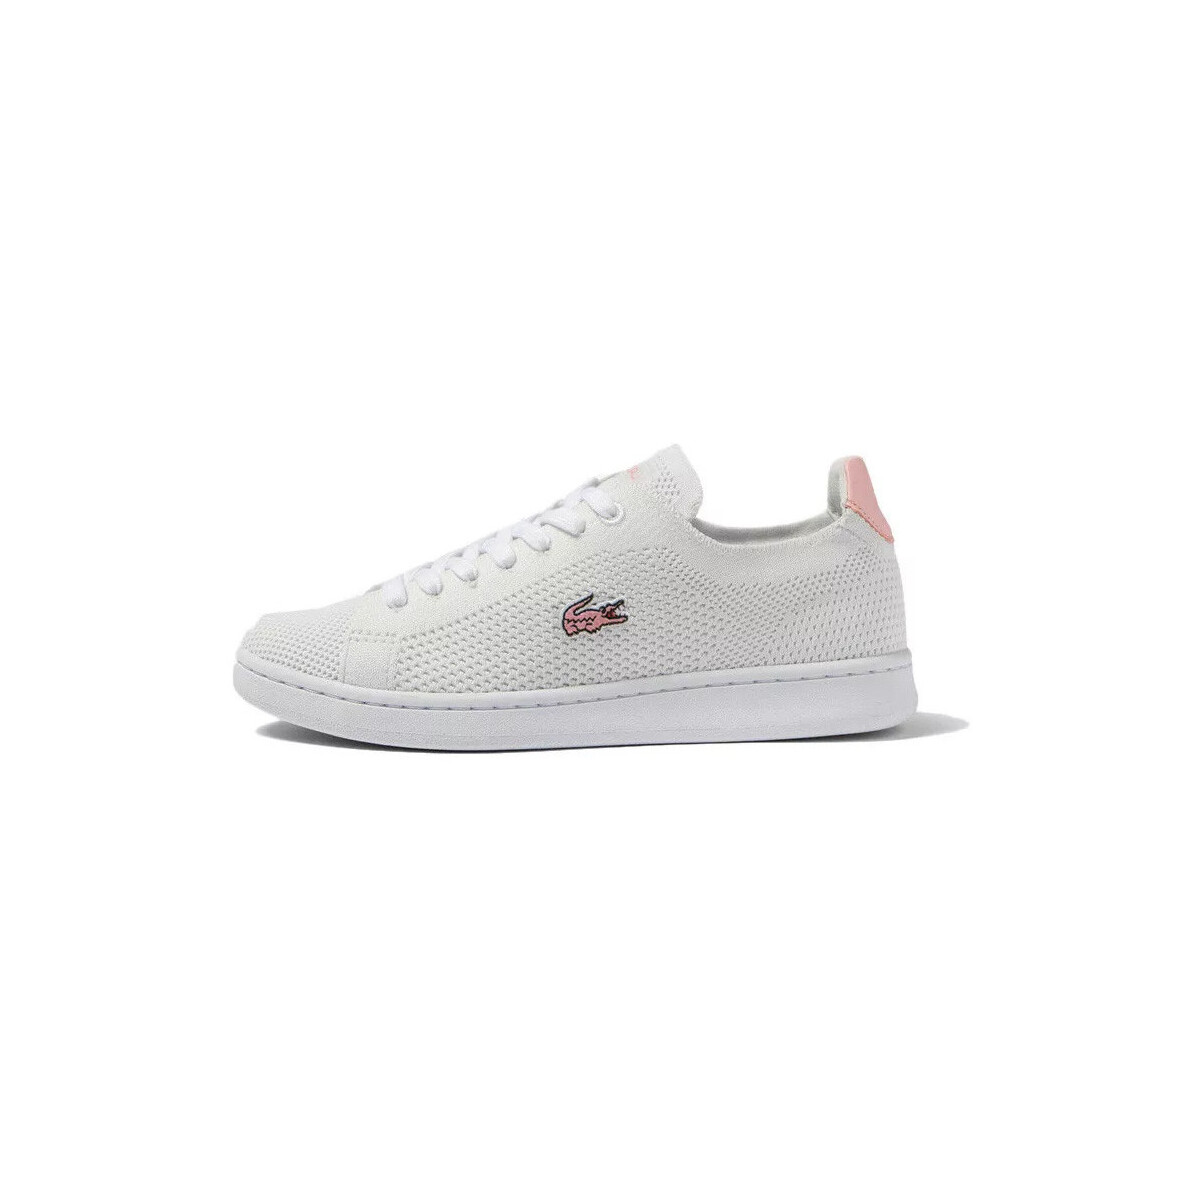 Chaussures Femme Baskets basses Lacoste CARNABY PIQUEE Blanc